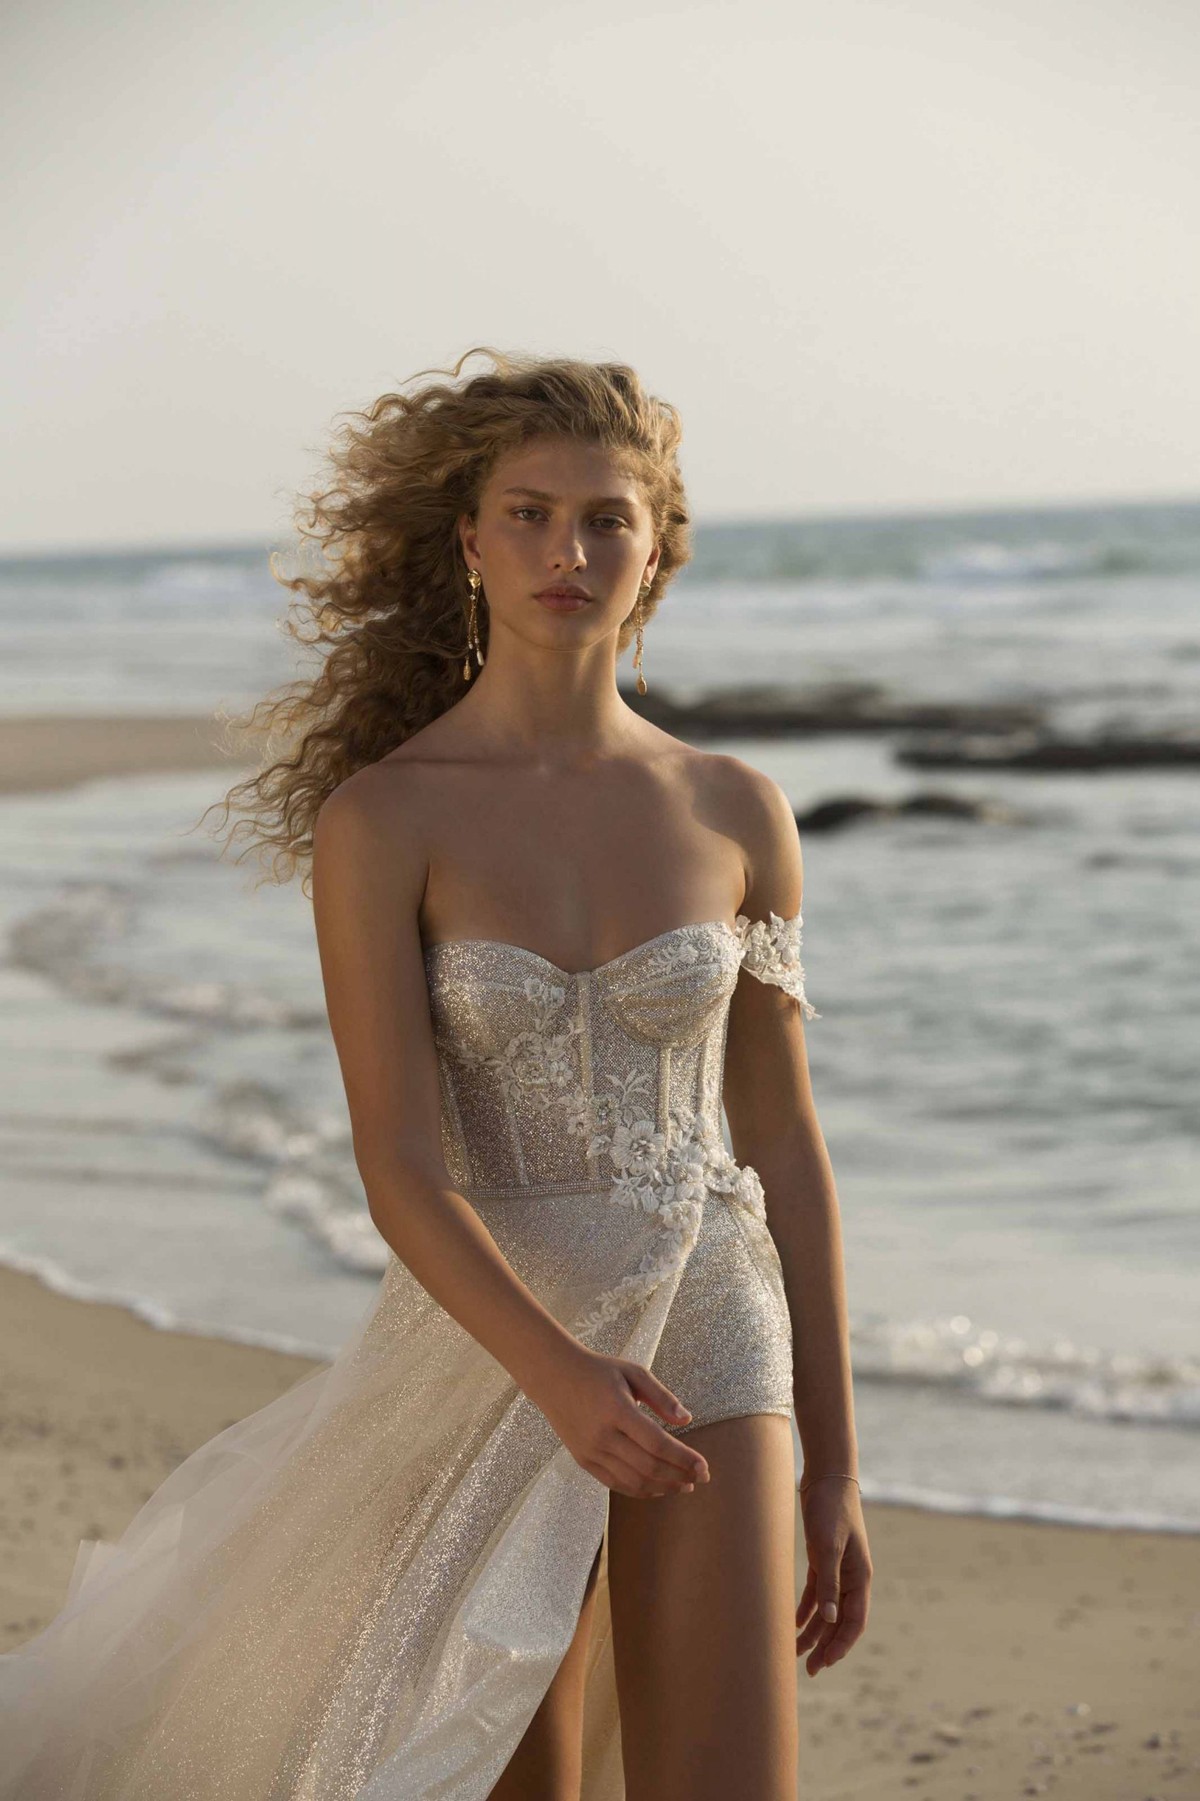 21-HARPER Bridal Dress Inspirated By Berta Muse 2021 Vista Mare Collection